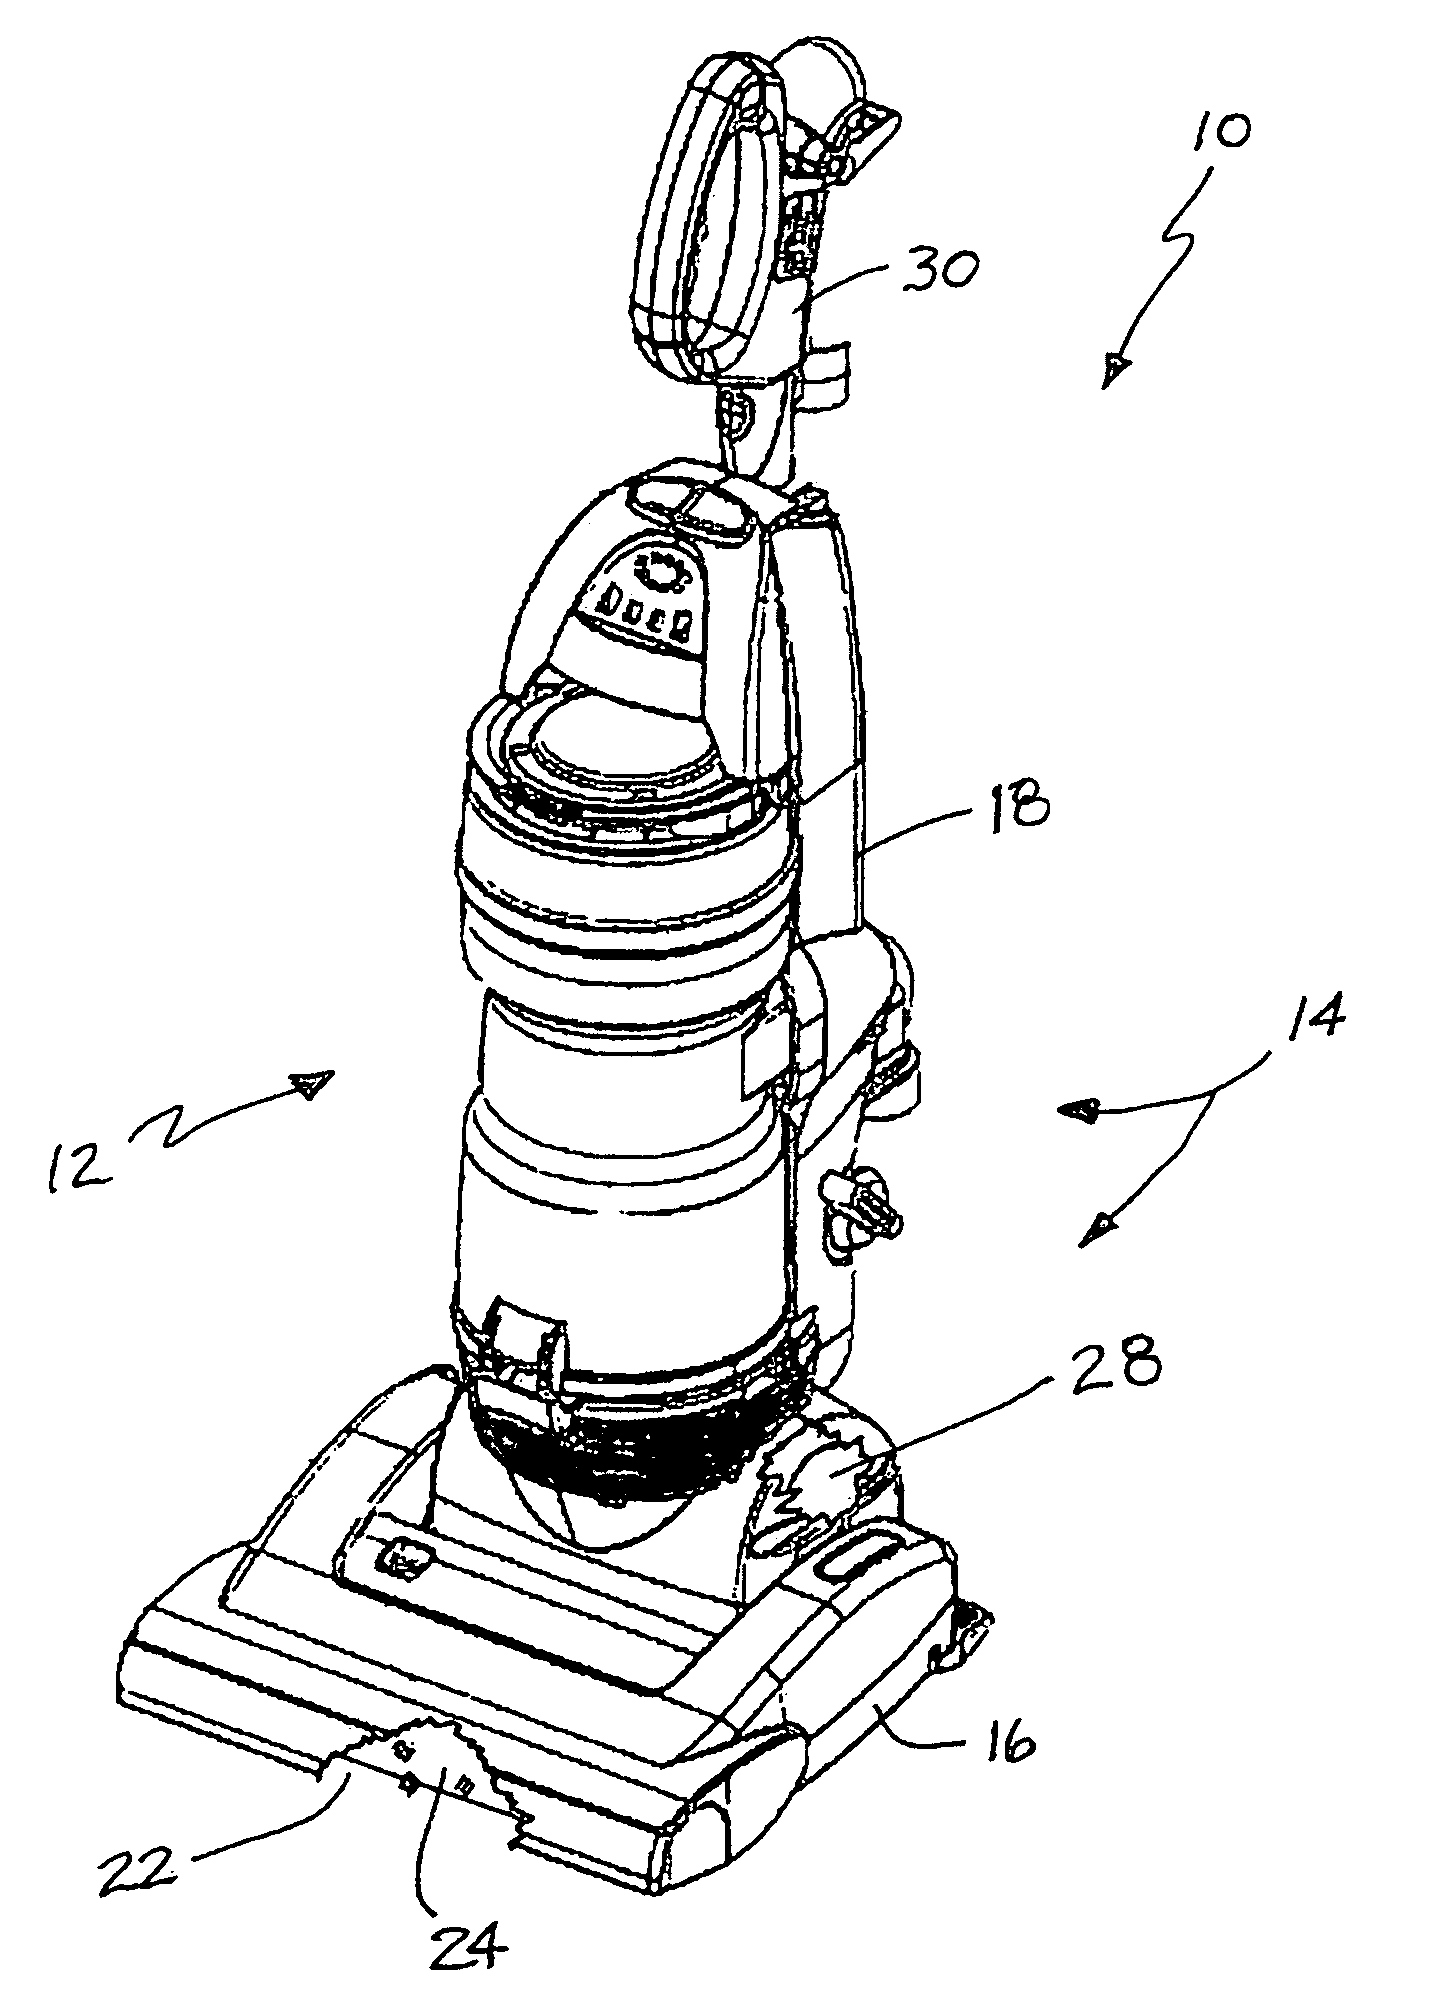 Filterless and bagless vacuum cleaner incorporating a sling shot separator